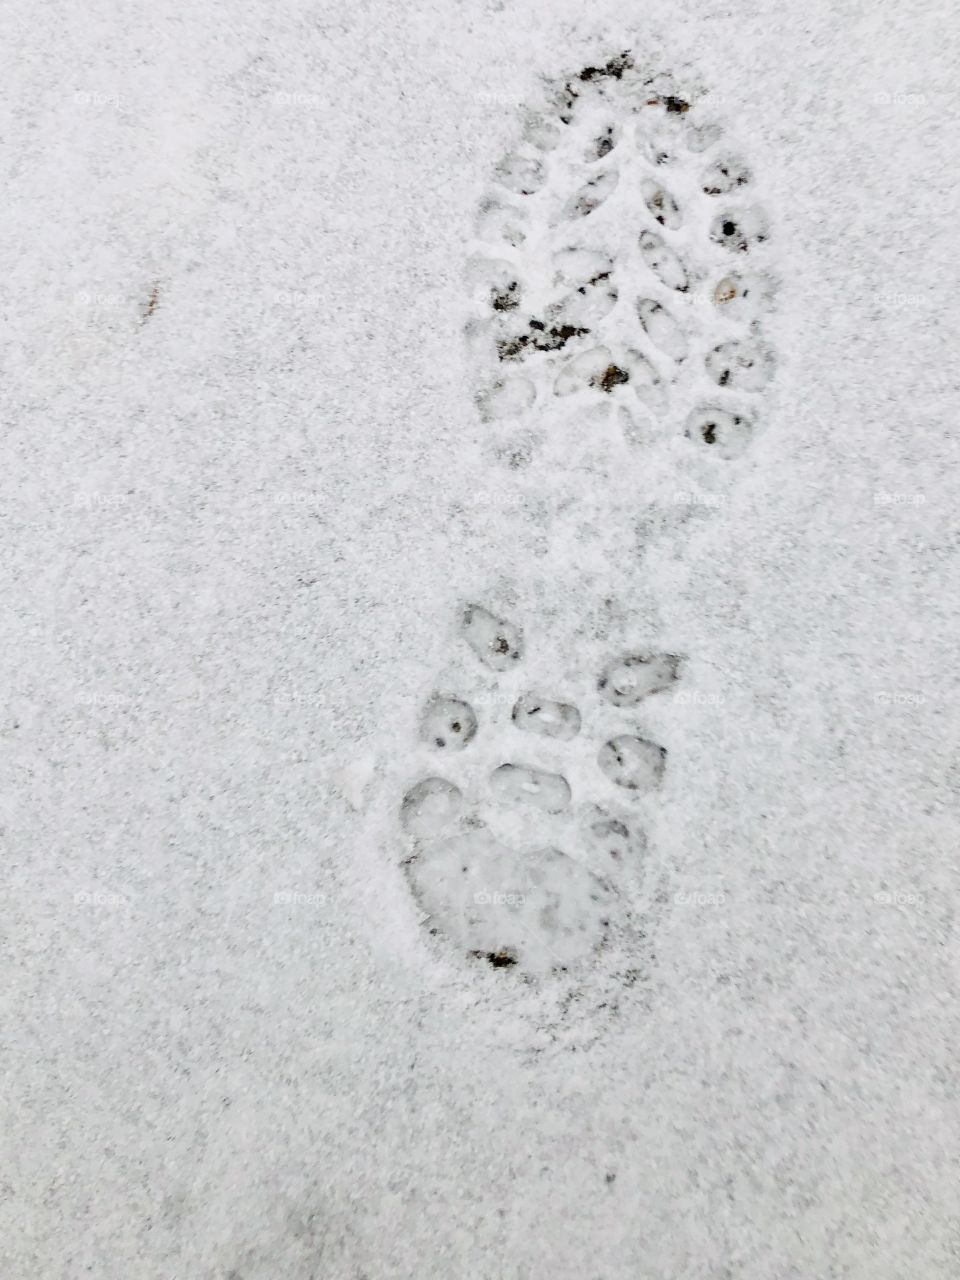 Footstep in snow-December 06 2018-Montreal, Quebec, Canada 